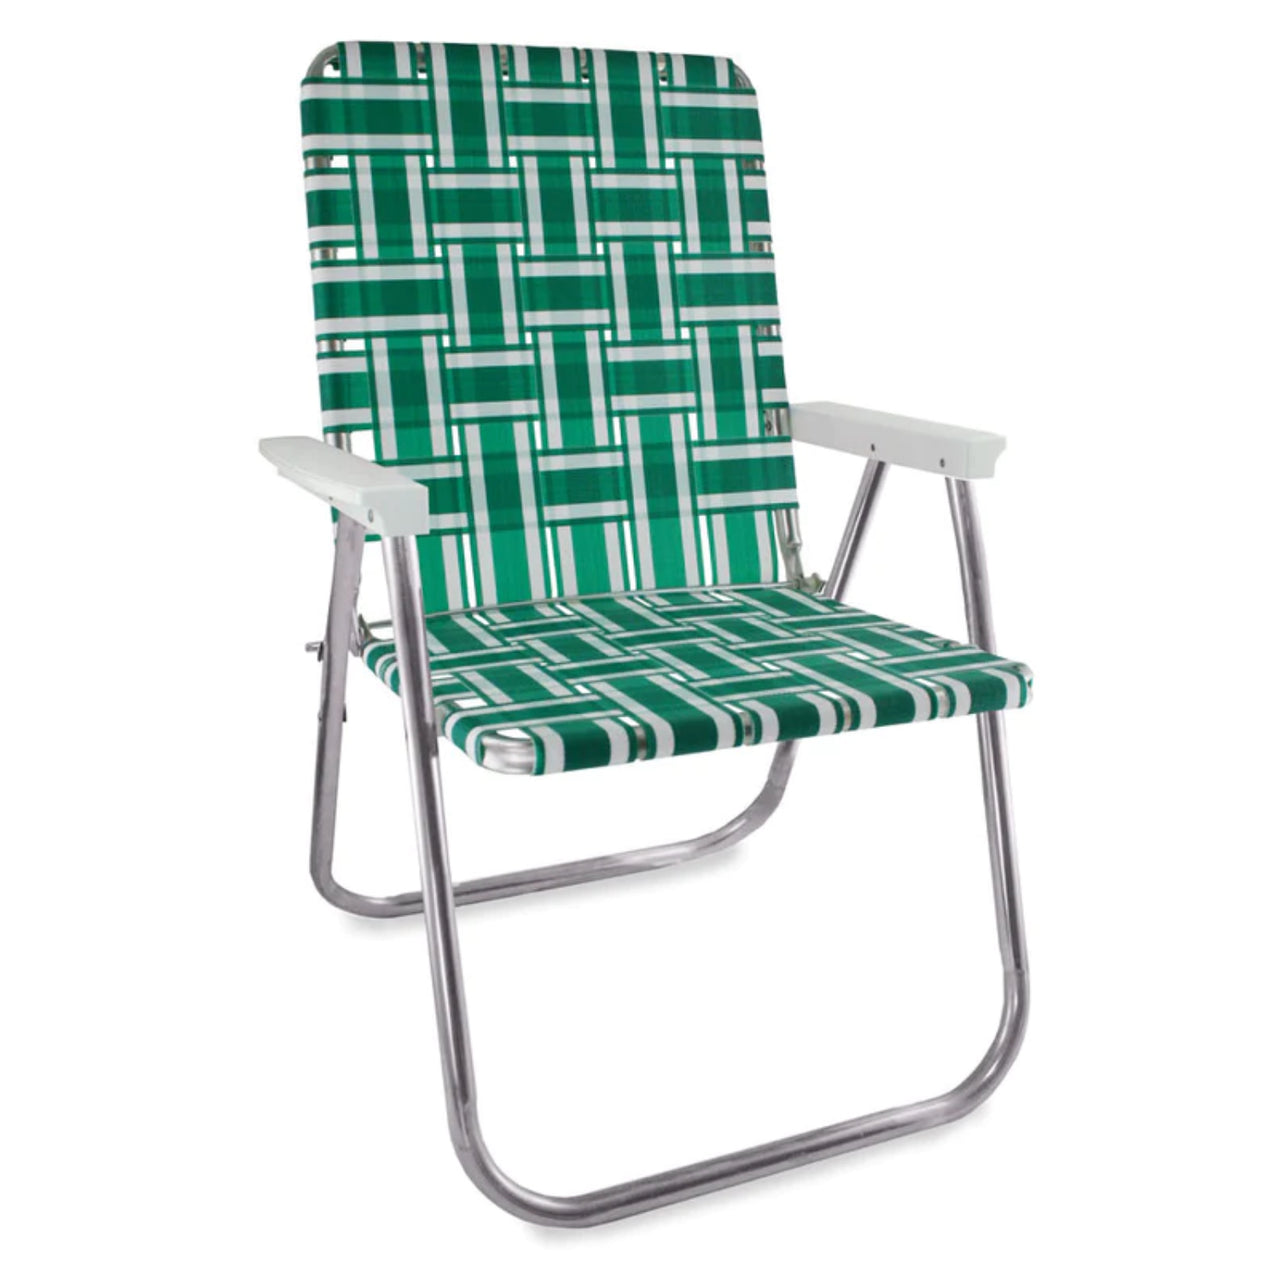 Lawn Chair | Green Deluxe Chair